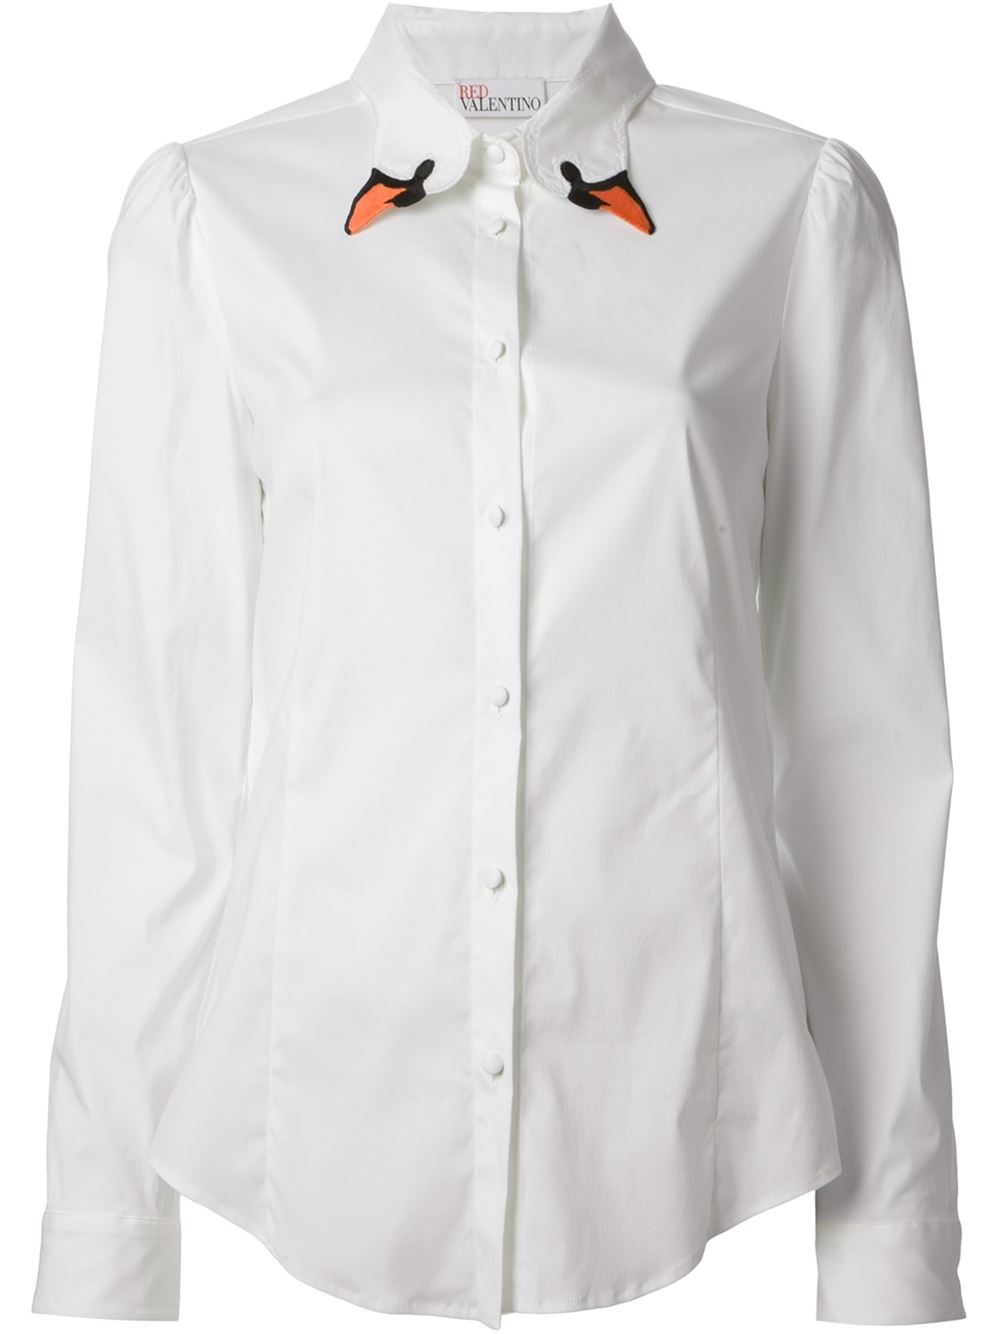 Valentino Swan Embroidered Shirt in White | Lyst